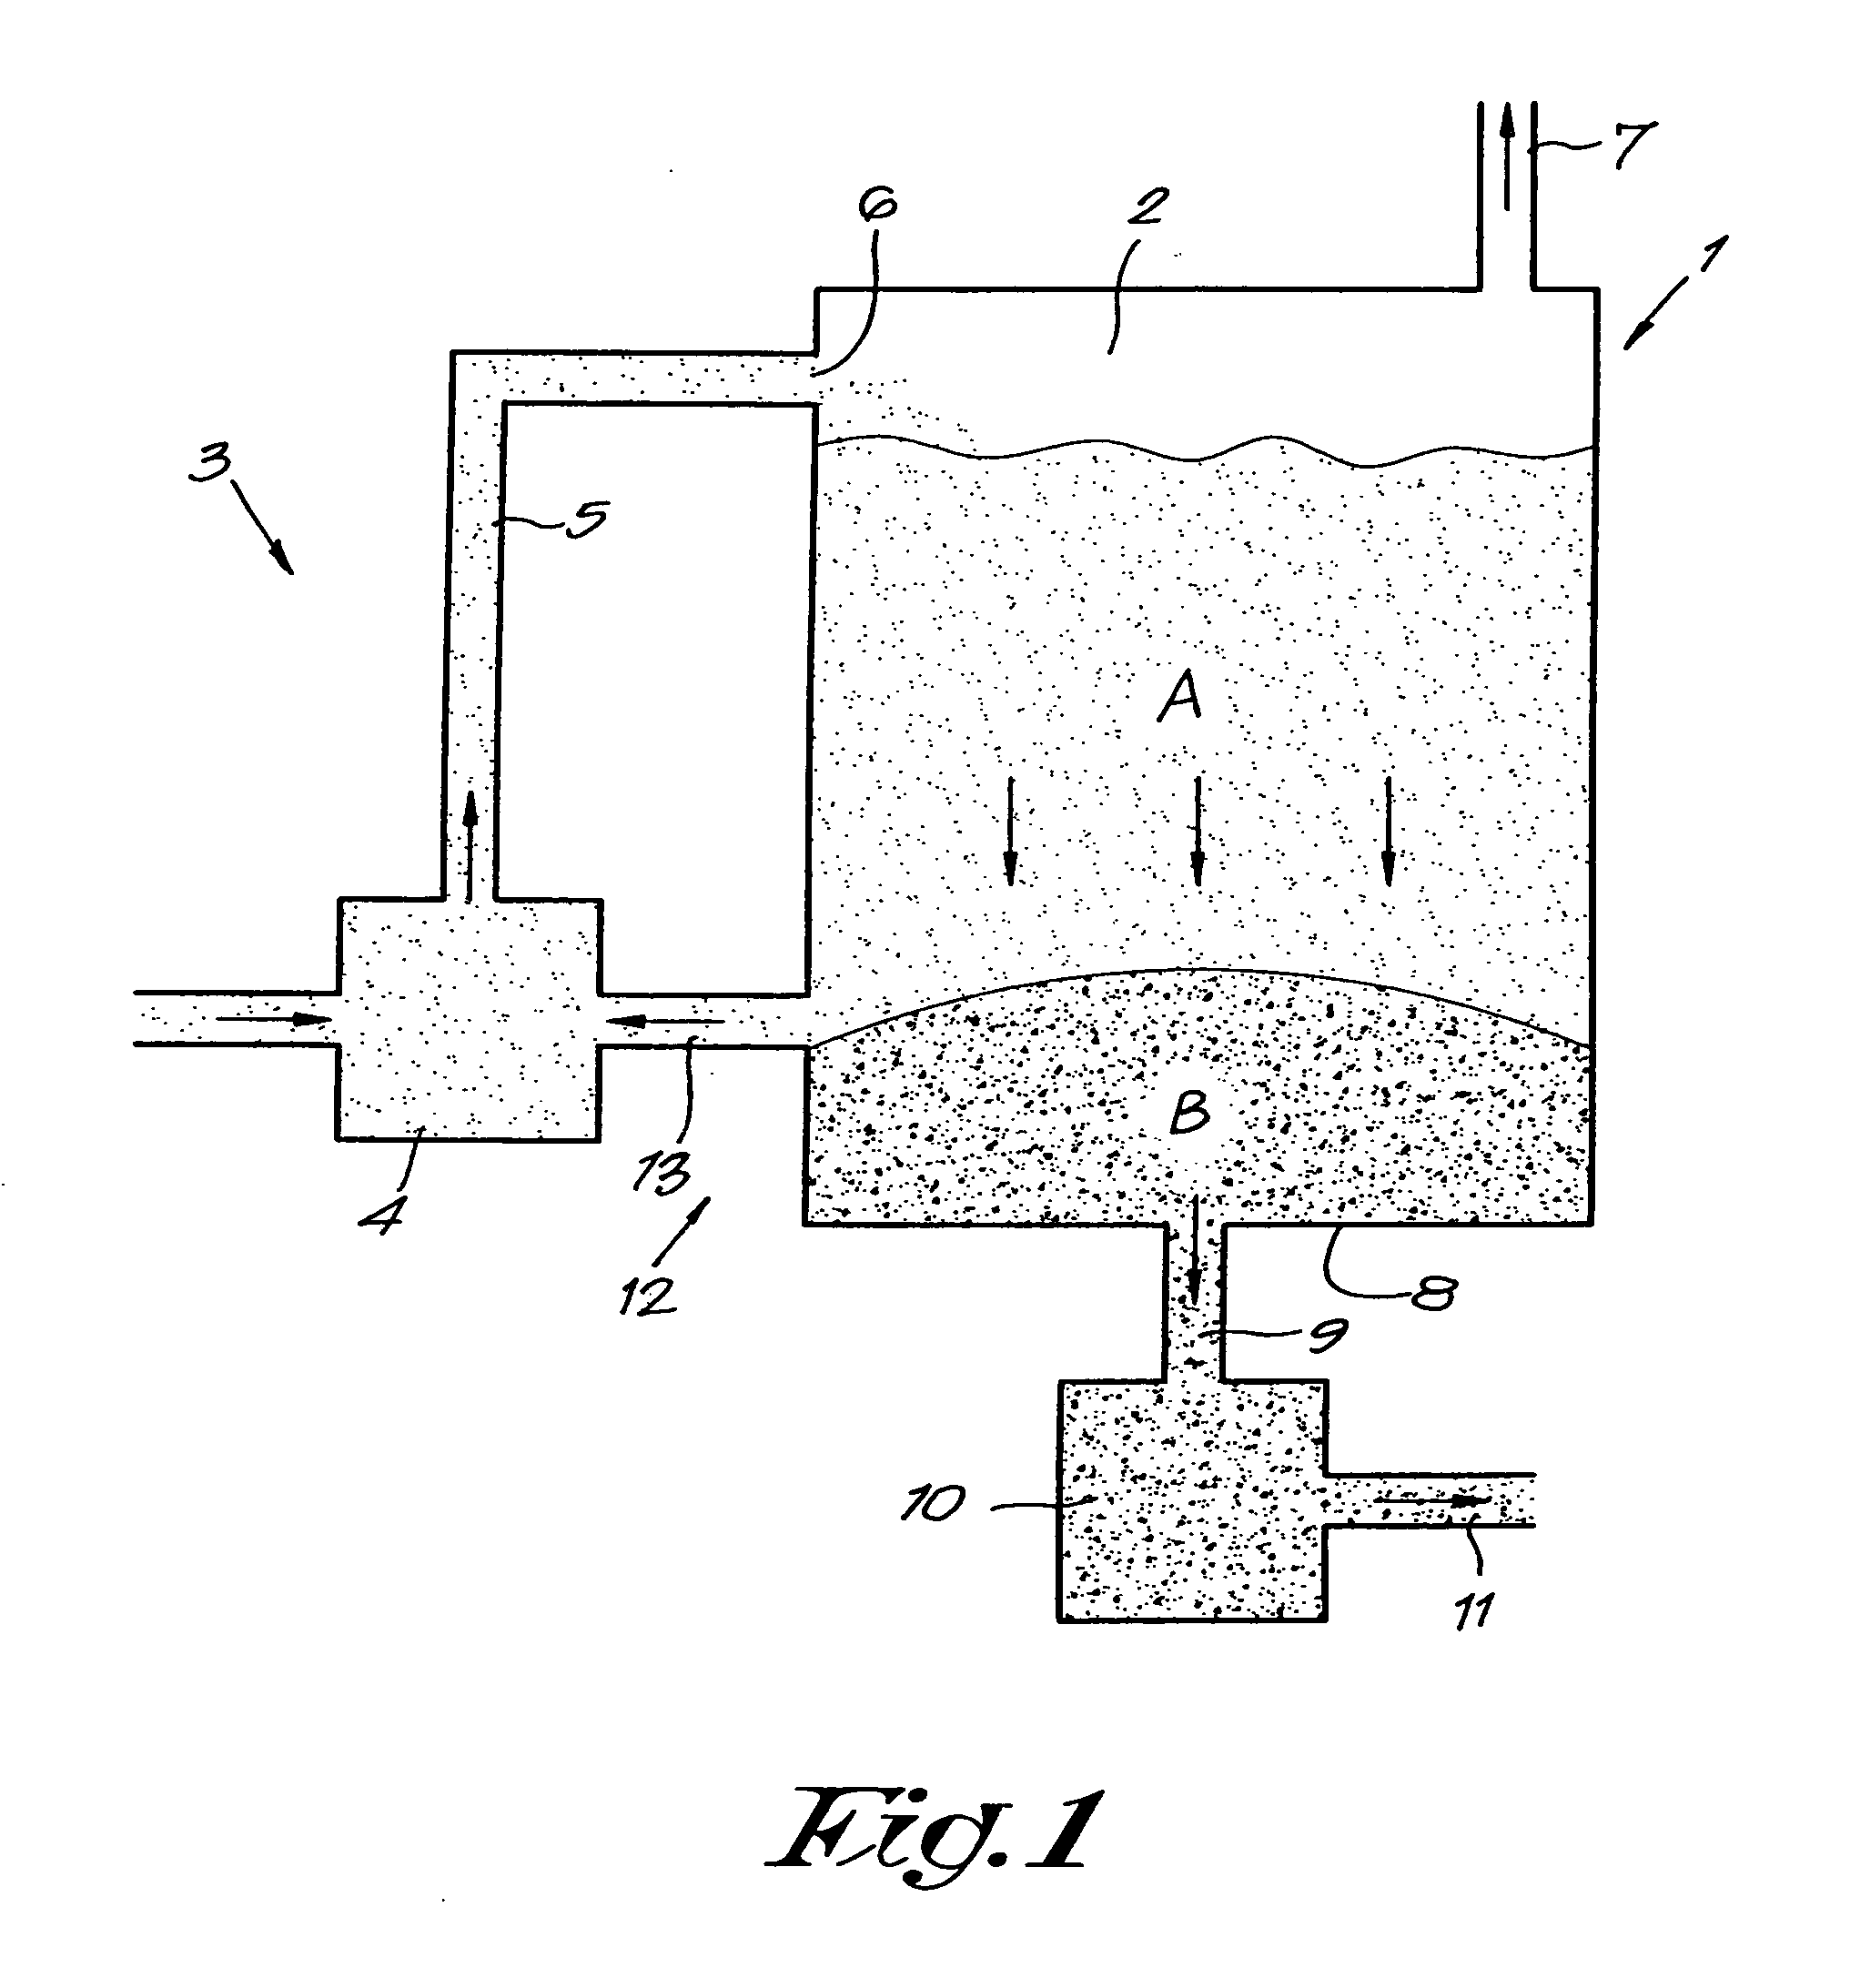 Method and device for the anaerobic fermentation of organic material